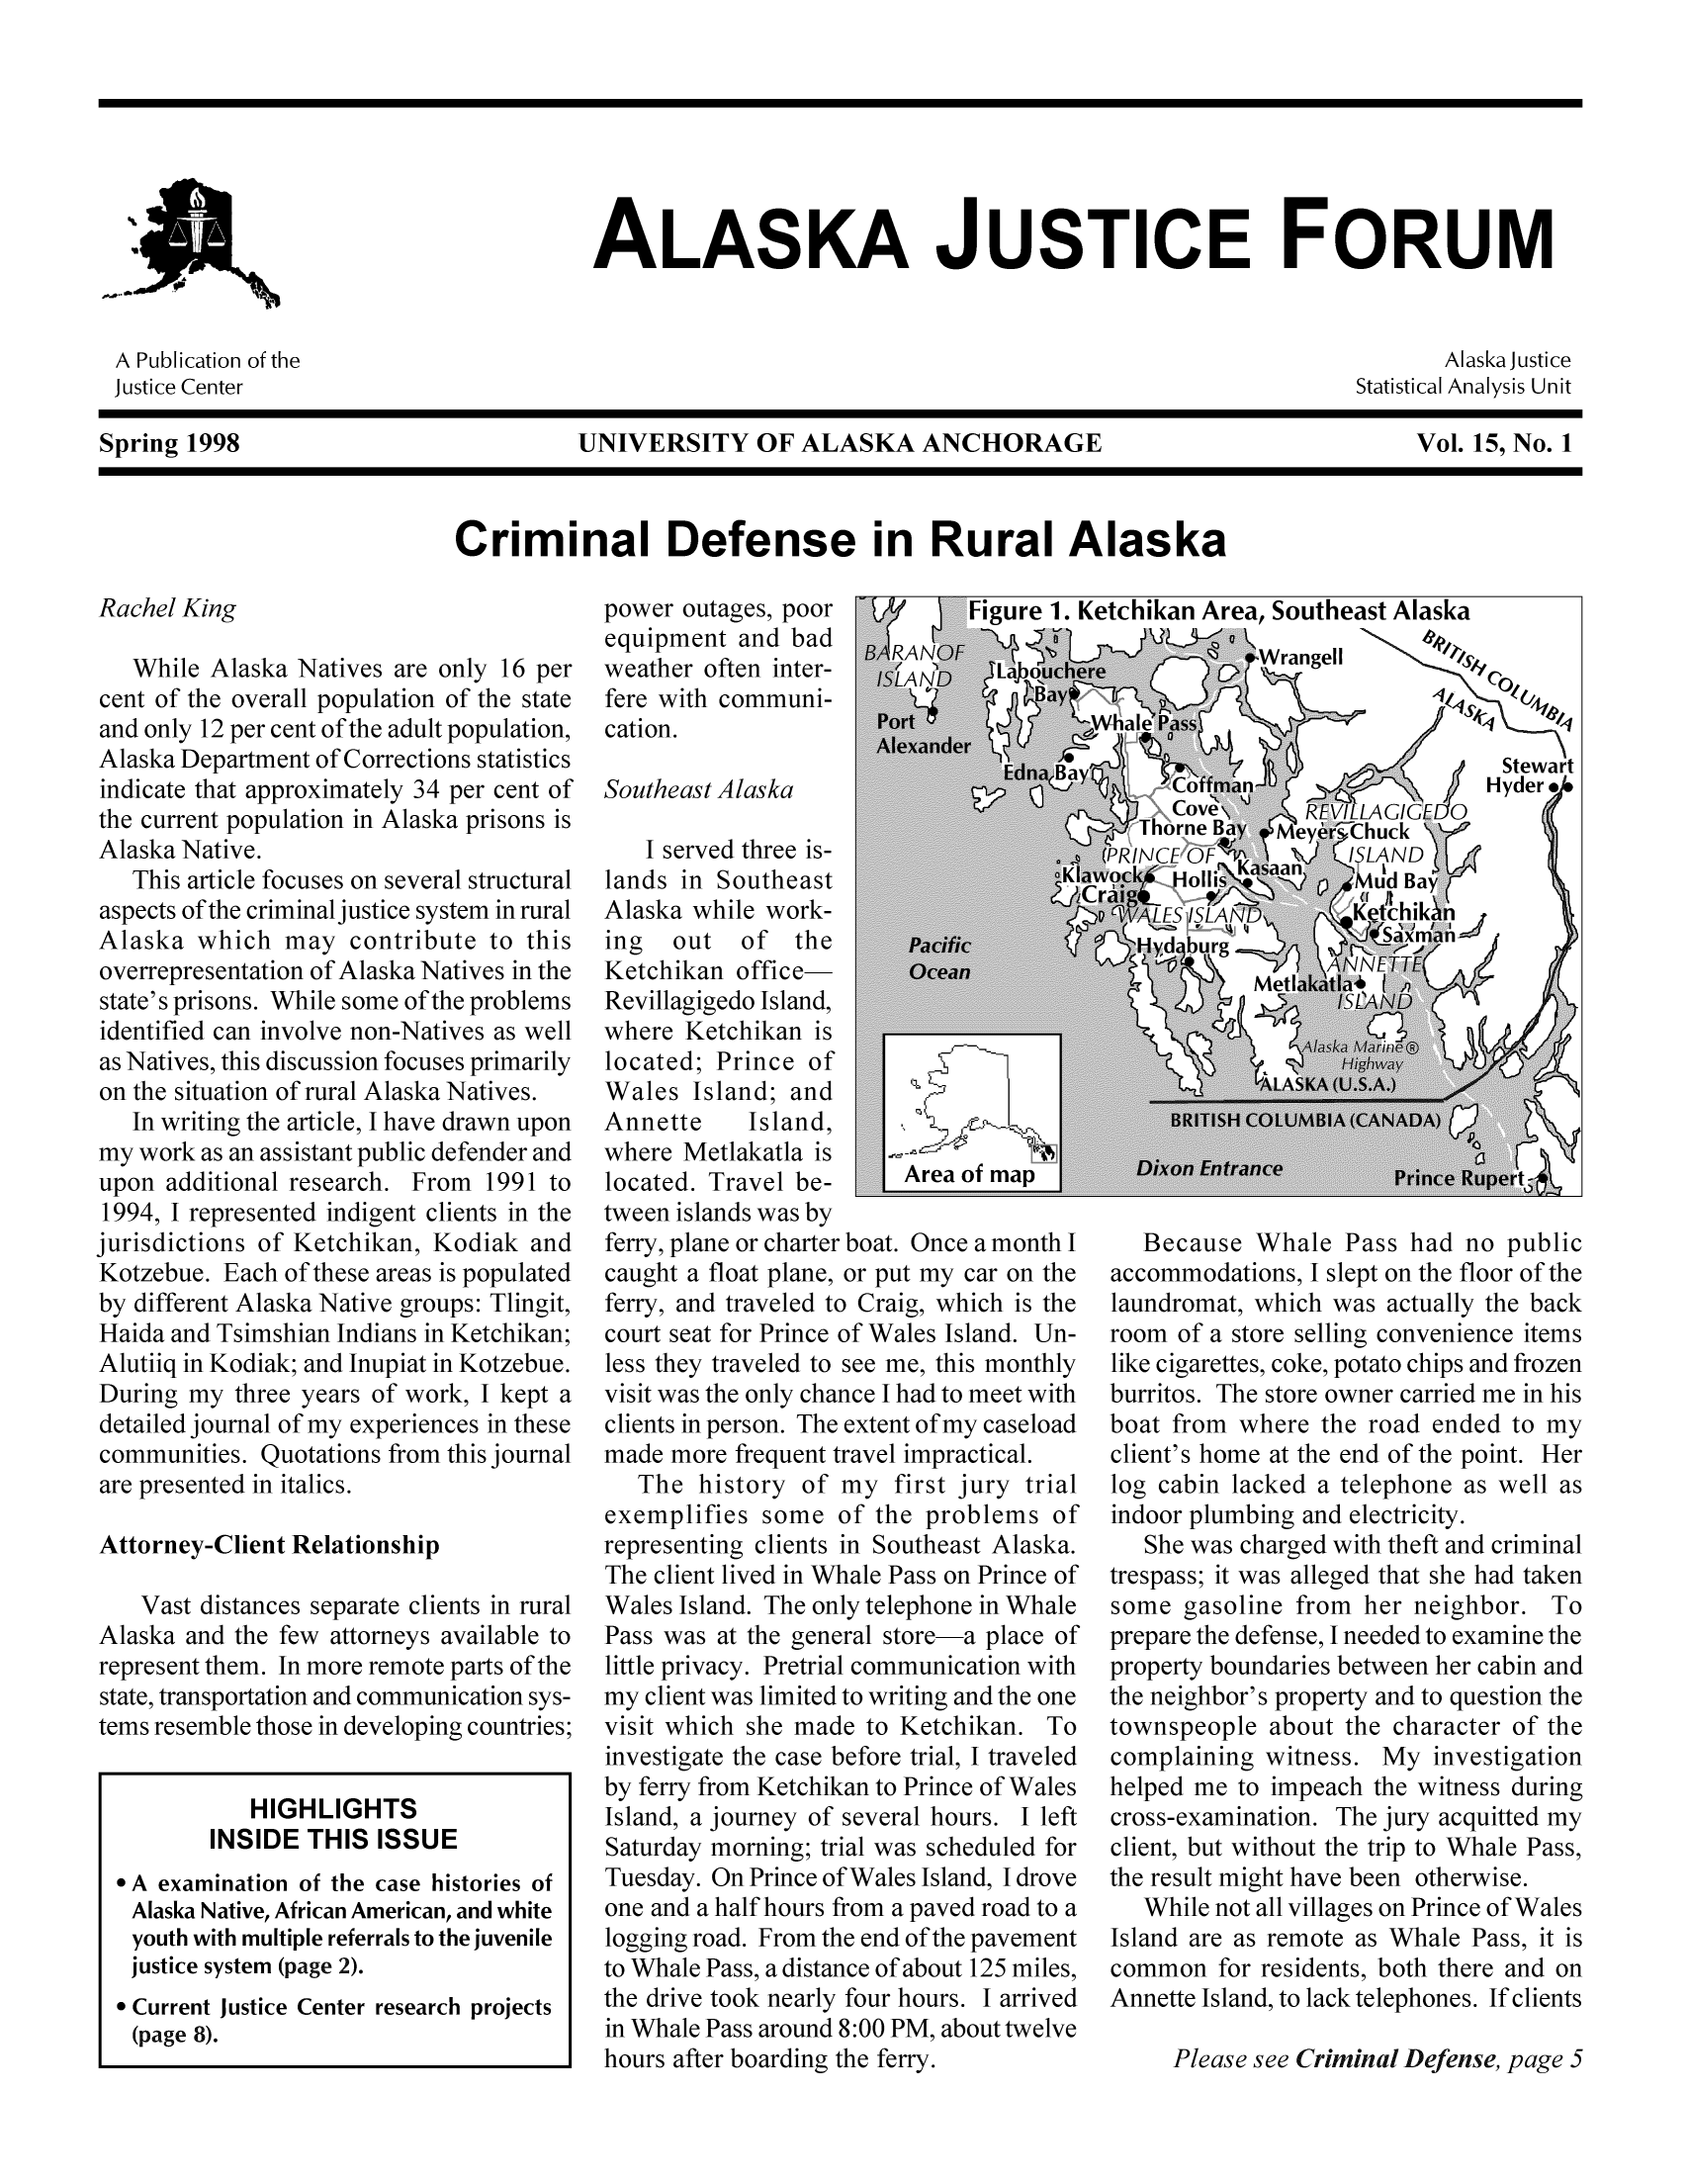 handle is hein.journals/aljufor15 and id is 1 raw text is: ALASKA JUSTICE FORUMA Publication of the                                                     Alaska JusticeJustice Center                                                      Statistical Analysis UnitSpring 1998               UNIVERSITY OF ALASKA ANCHORAGE                Vol. 15, No. 1Criminal Defense in Rural AlaskaRachel KingWhile Alaska Natives are only 16 percent of the overall population of the stateand only 12 per cent of the adult population,Alaska Department of Corrections statisticsindicate that approximately 34 per cent ofthe current population in Alaska prisons isAlaska Native.This article focuses on several structuralaspects of the criminal justice system in ruralAlaska which may contribute to thisoverrepresentation of Alaska Natives in thestate's prisons. While some of the problemsidentified can involve non-Natives as wellas Natives, this discussion focuses primarilyon the situation of rural Alaska Natives.In writing the article, I have drawn uponmy work as an assistant public defender andupon additional research. From 1991 to1994, I represented indigent clients in thejurisdictions of Ketchikan, Kodiak andKotzebue. Each of these areas is populatedby different Alaska Native groups: Tlingit,Haida and Tsimshian Indians in Ketchikan;Alutiiq in Kodiak; and Inupiat in Kotzebue.During my three years of work, I kept adetailed journal of my experiences in thesecommunities. Quotations from this journalare presented in italics.Attorney-Client RelationshipVast distances separate clients in ruralAlaska and the few attorneys available torepresent them. In more remote parts of thestate, transportation and communication sys-tems resemble those in developing countries;HIGHLIGHTSINSIDE THIS ISSUE* A examination of the case histories ofAlaska Native, African American, and whiteyouth with multiple referrals to the juvenilejustice system (page 2).* Current Justice Center research projects(page 8).power outages, poor          Figure 1. hequipment and bad   BARANOF Nweather often inter-   /I   tLabouchefere with communi-      1Baycation.AenrSoutheast AlaskaI served three is-lands in SoutheastAlaska while work-ing  out   of the       PacificKetchikan office-       OceanRevillagigedo Island,where Ketchikan islocated; Prince ofWales Island; andAnnette    Island,where Metlakatla islocated. Travel be-     Area of maptween islands was byferry, plane or charter boat. Once a month Icaught a float plane, or put my car on theferry, and traveled to Craig, which is thecourt seat for Prince of Wales Island. Un-less they traveled to see me, this monthlyvisit was the only chance I had to meet withclients in person. The extent of my caseloadmade more frequent travel impractical.The history of my first jury trialexemplifies some of the problems ofrepresenting clients in Southeast Alaska.The client lived in Whale Pass on Prince ofWales Island. The only telephone in WhalePass was at the general store-a place oflittle privacy. Pretrial communication withmy client was limited to writing and the onevisit which she made to Ketchikan. Toinvestigate the case before trial, I traveledby ferry from Ketchikan to Prince of WalesIsland, a journey of several hours. I leftSaturday morning; trial was scheduled forTuesday. On Prince of Wales Island, I droveone and a half hours from a paved road to alogging road. From the end of the pavementto Whale Pass, a distance of about 125 miles,the drive took nearly four hours. I arrivedin Whale Pass around 8:00 PM, about twelvehours after boarding the ferry.Because Whale Pass had no publicaccommodations, I slept on the floor of thelaundromat, which was actually the backroom of a store selling convenience itemslike cigarettes, coke, potato chips and frozenburritos. The store owner carried me in hisboat from where the road ended to myclient's home at the end of the point. Herlog cabin lacked a telephone as well asindoor plumbing and electricity.She was charged with theft and criminaltrespass; it was alleged that she had takensome gasoline from her neighbor. Toprepare the defense, I needed to examine theproperty boundaries between her cabin andthe neighbor's property and to question thetownspeople about the character of thecomplaining witness. My investigationhelped me to impeach the witness duringcross-examination. The jury acquitted myclient, but without the trip to Whale Pass,the result might have been otherwise.While not all villages on Prince of WalesIsland are as remote as Whale Pass, it iscommon for residents, both there and onAnnette Island, to lack telephones. If clientsPlease see Criminal Defense, page 5